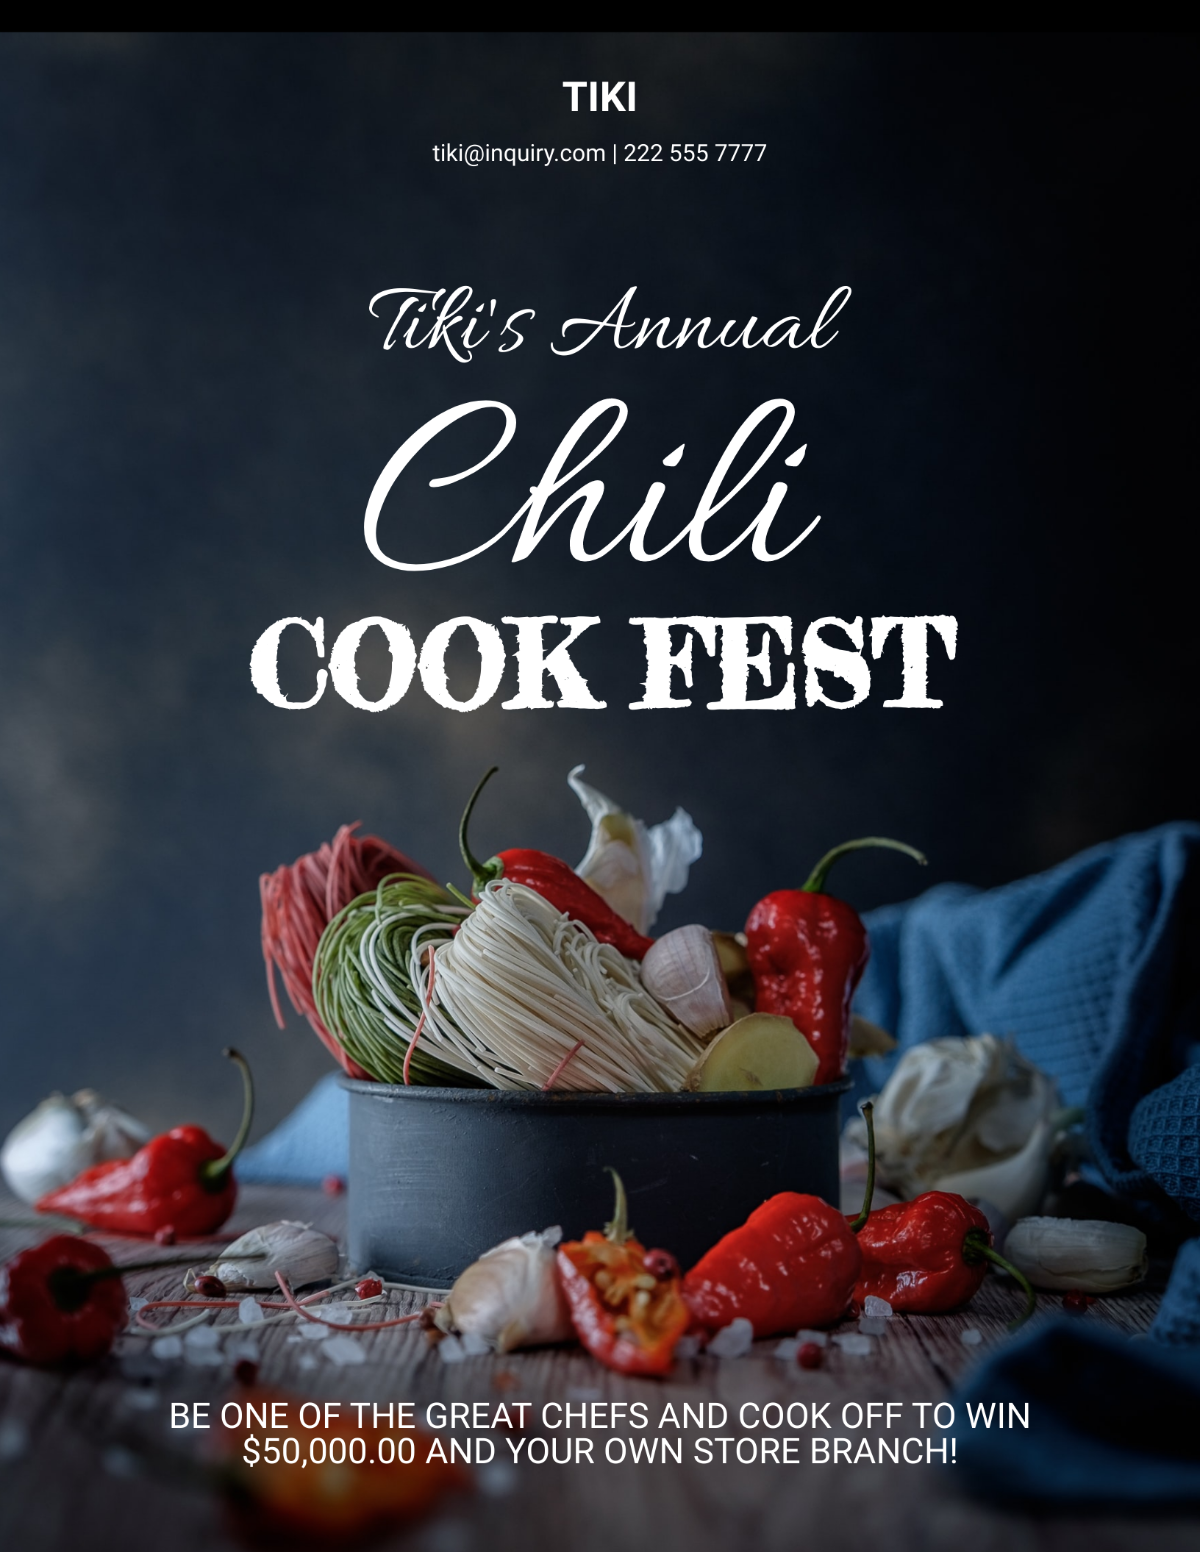 Chili Cook Off Announcement Flyer Template